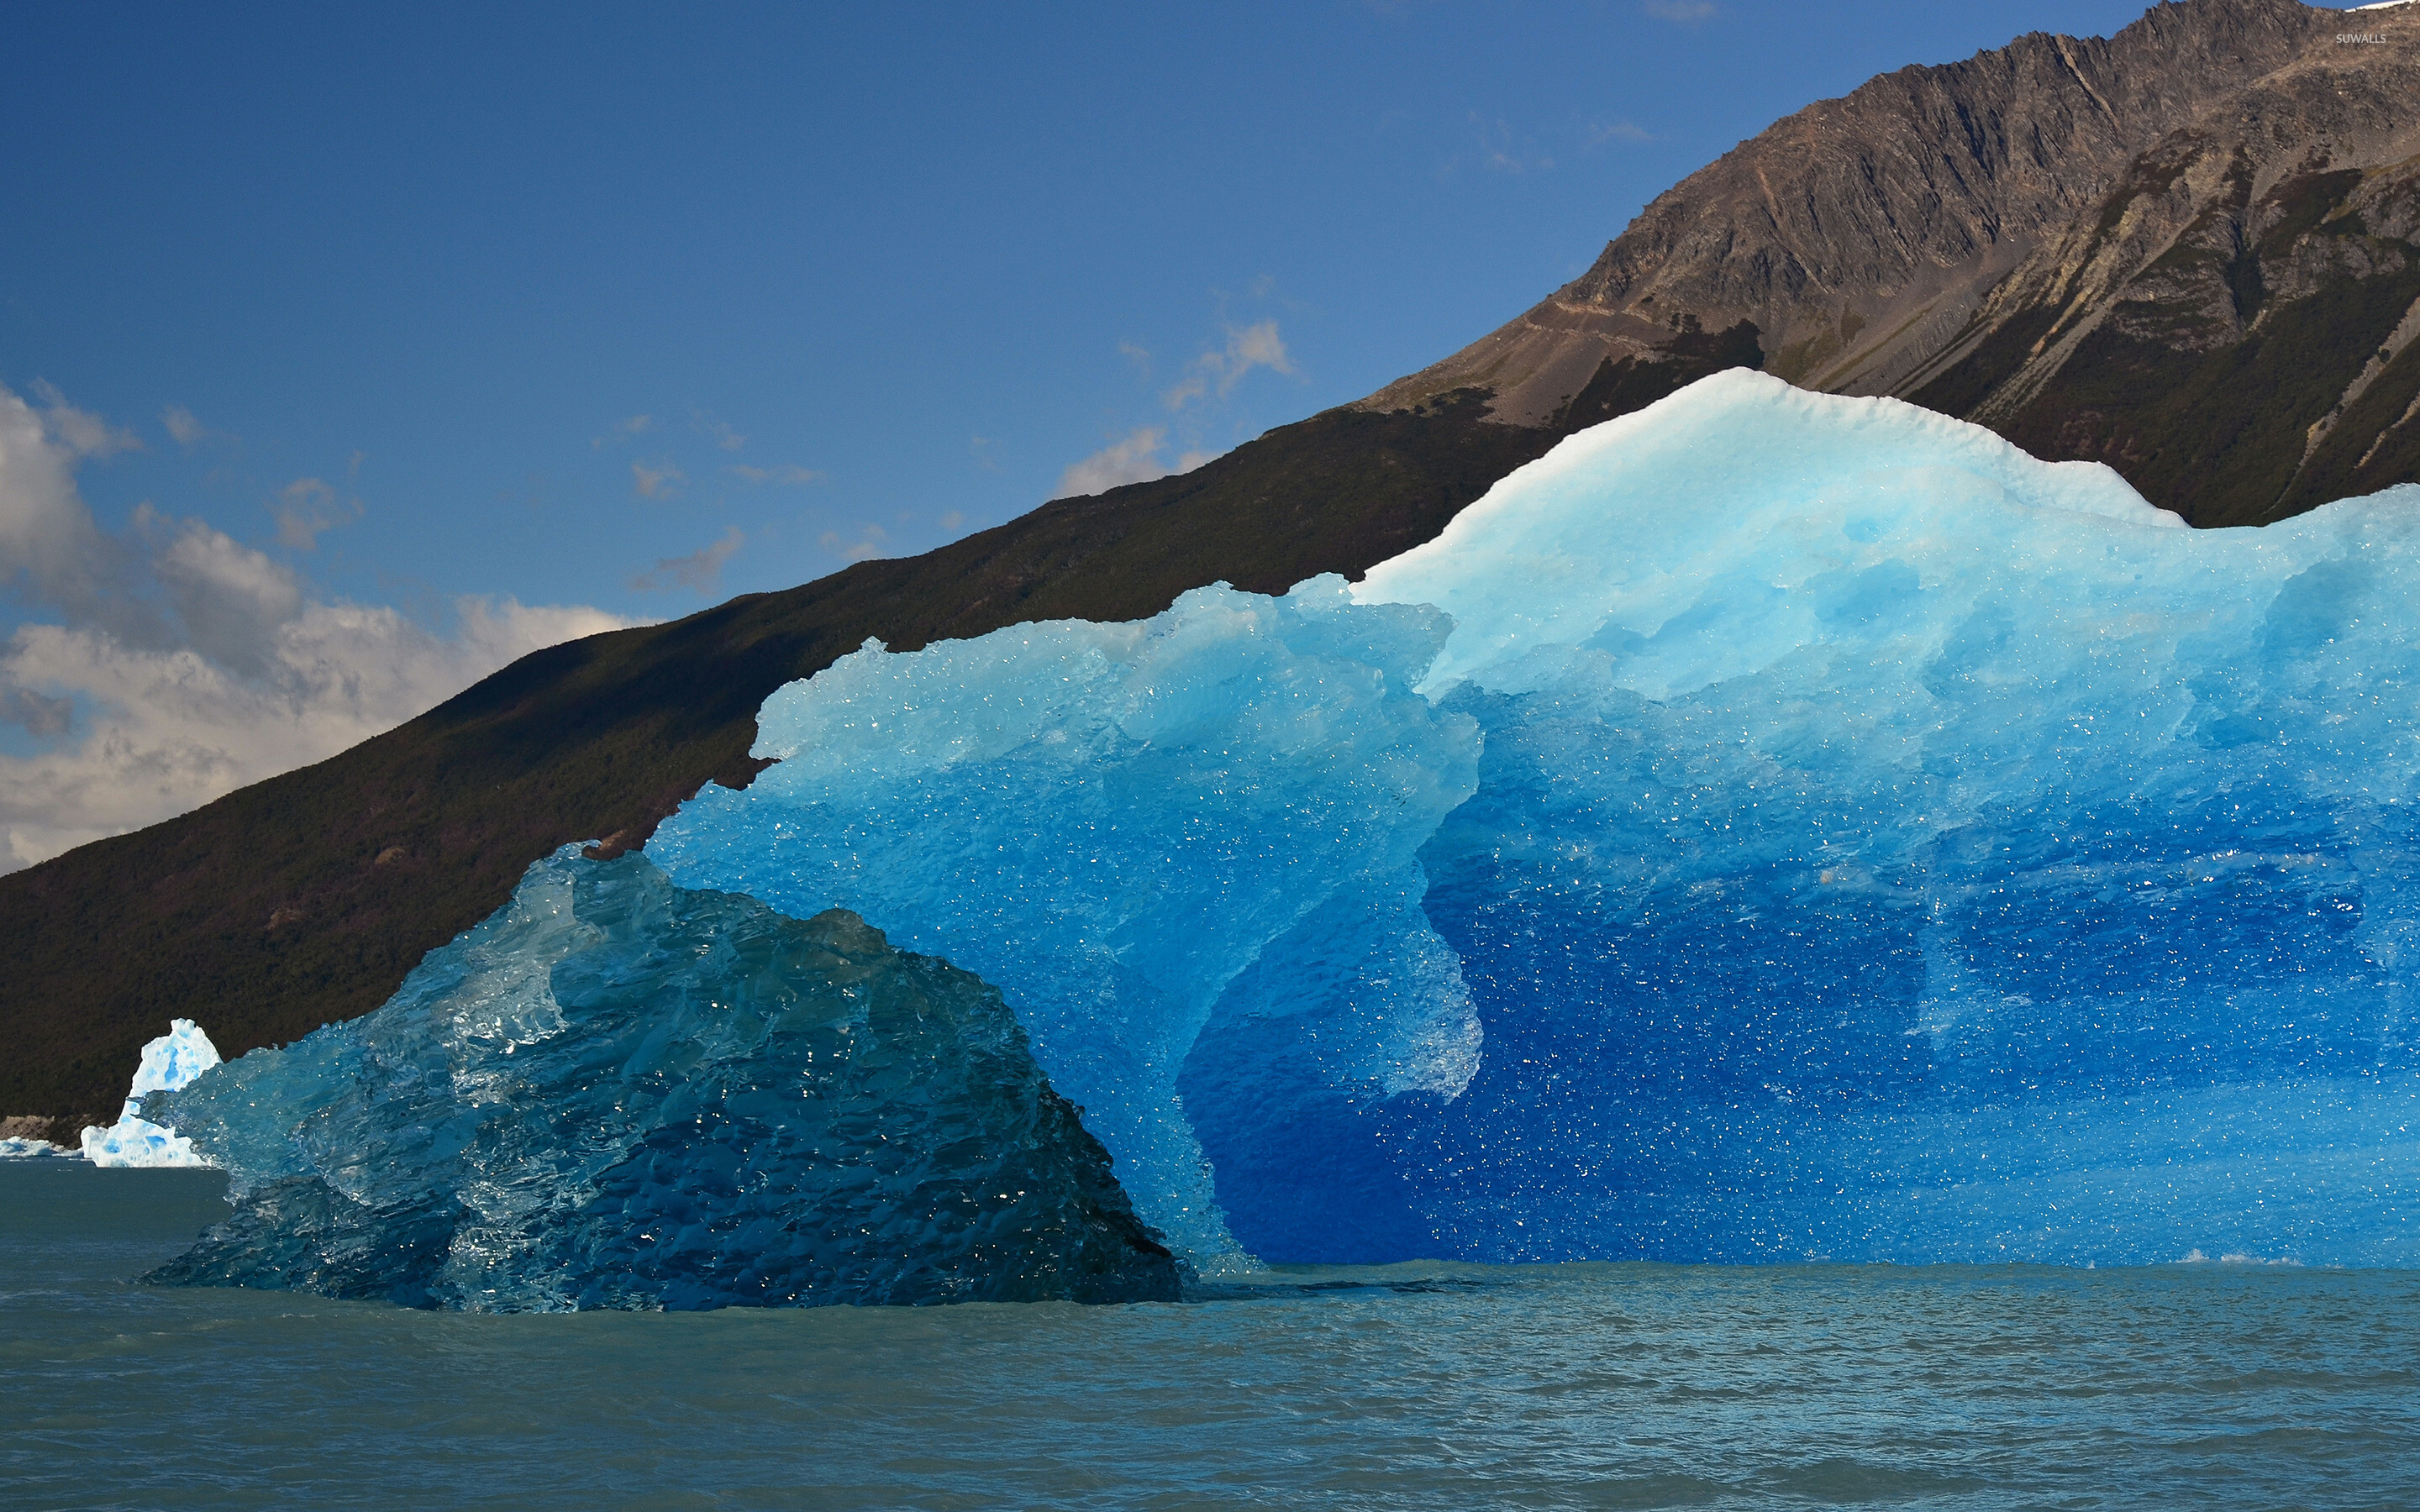 Glacier: Blue melting ice, The solid form of water, Natural environment, A mass of ice. 2880x1800 HD Wallpaper.